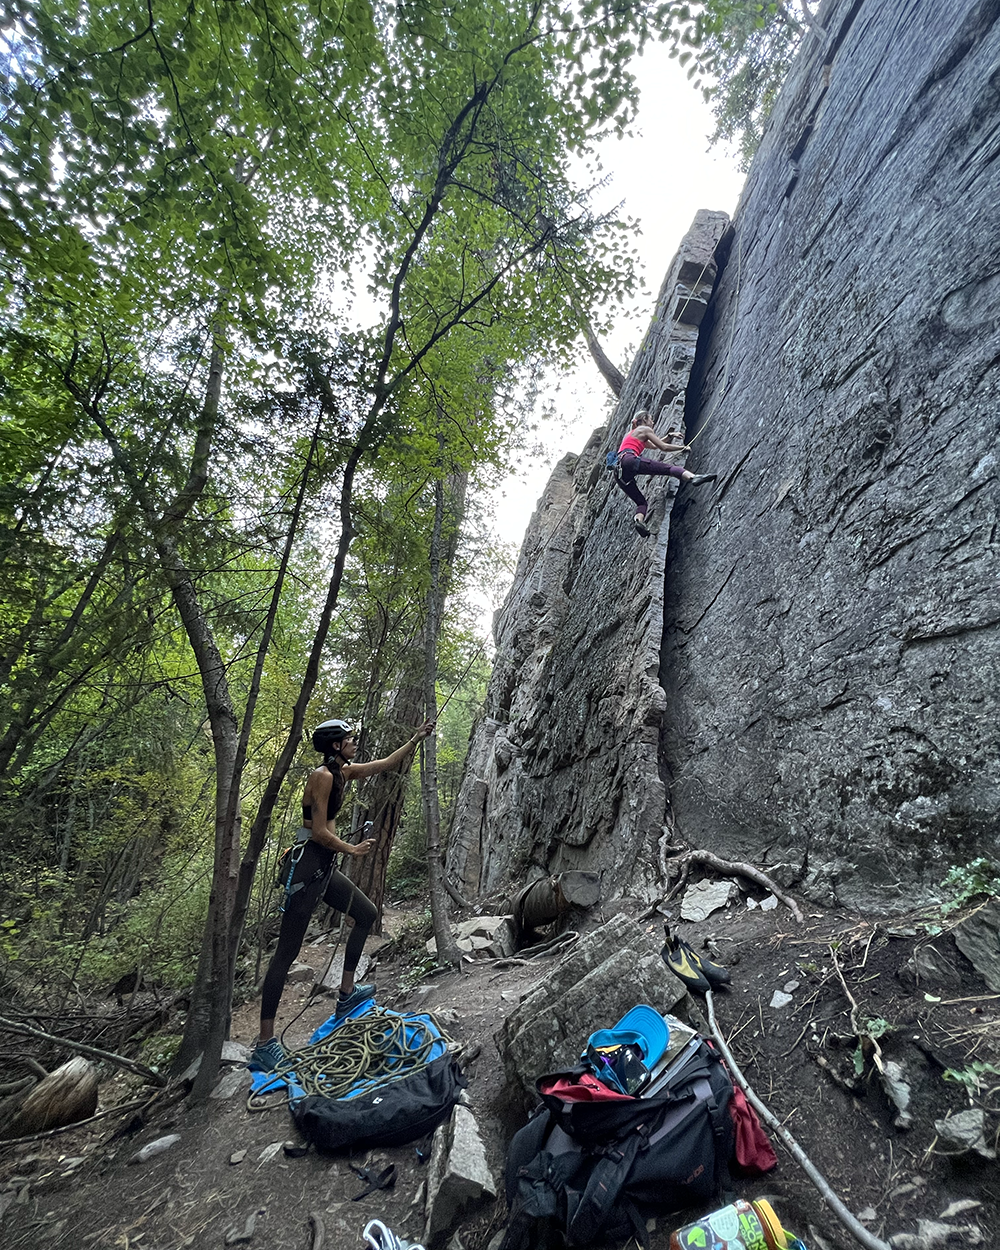  Sam and Natalie on Tick Crack 5.7 at Another Buttress, which is a super fun must-do. 